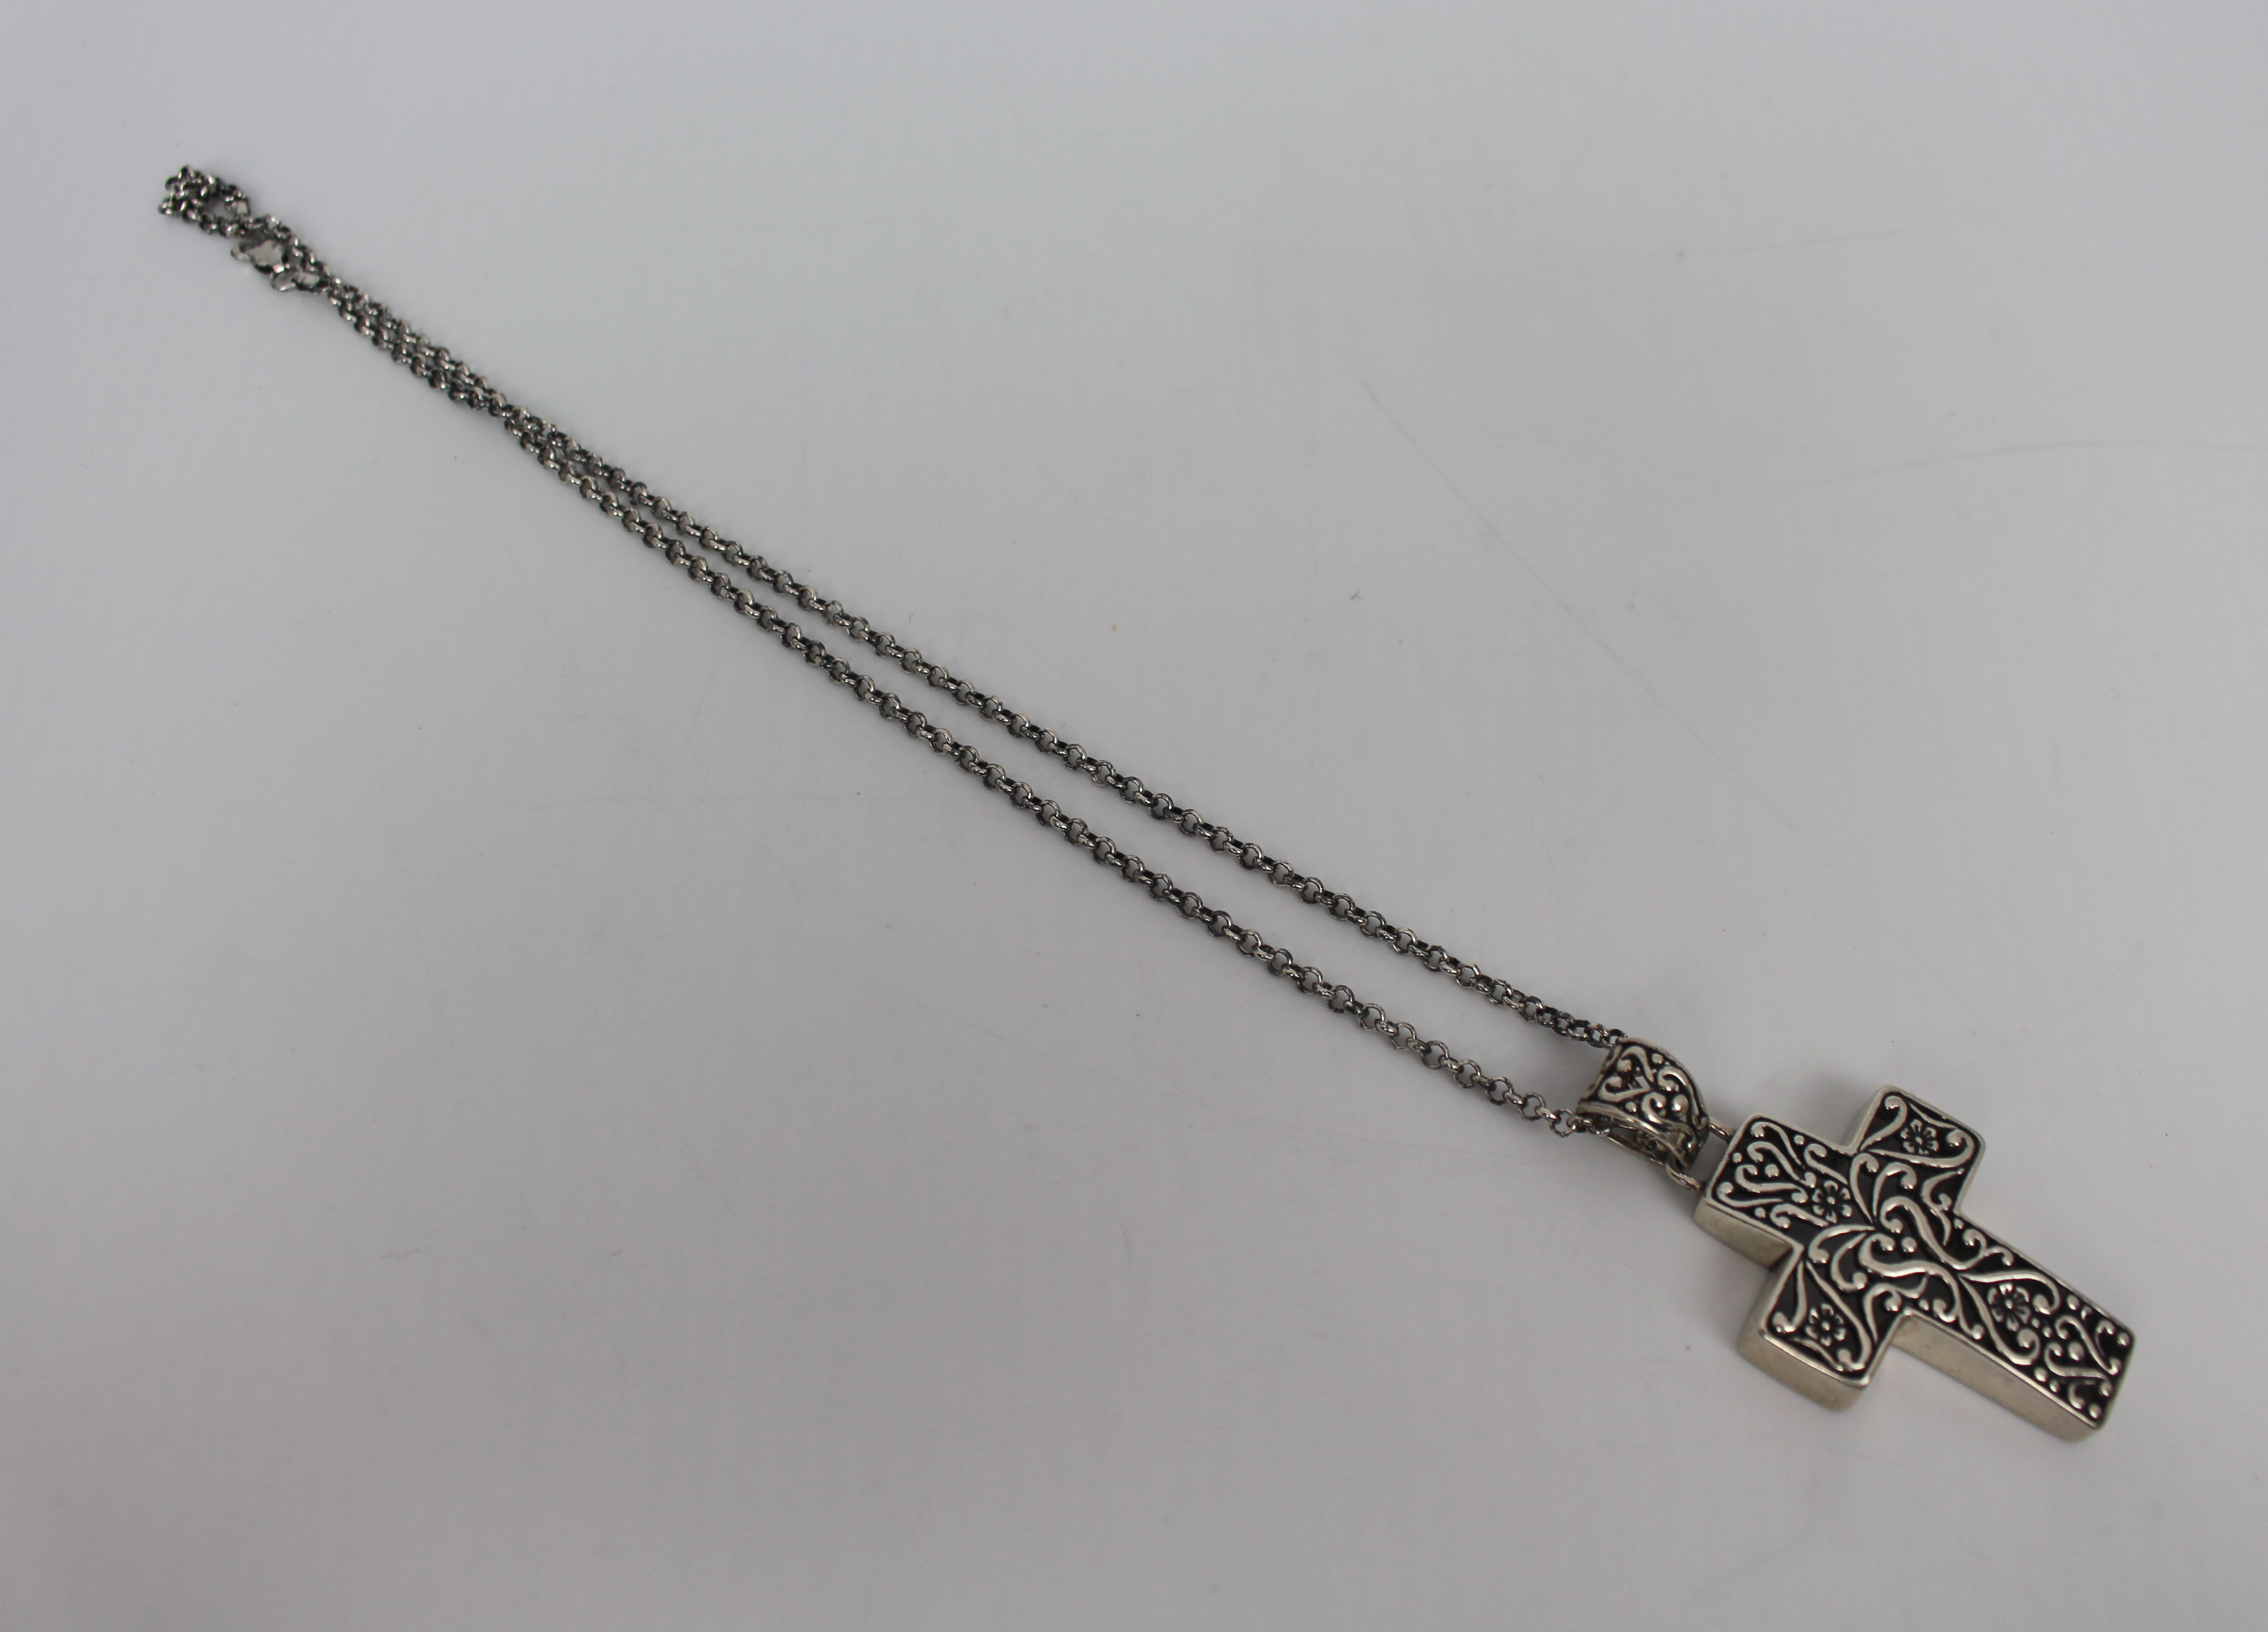 Silver Cross on Chain - Image 3 of 3